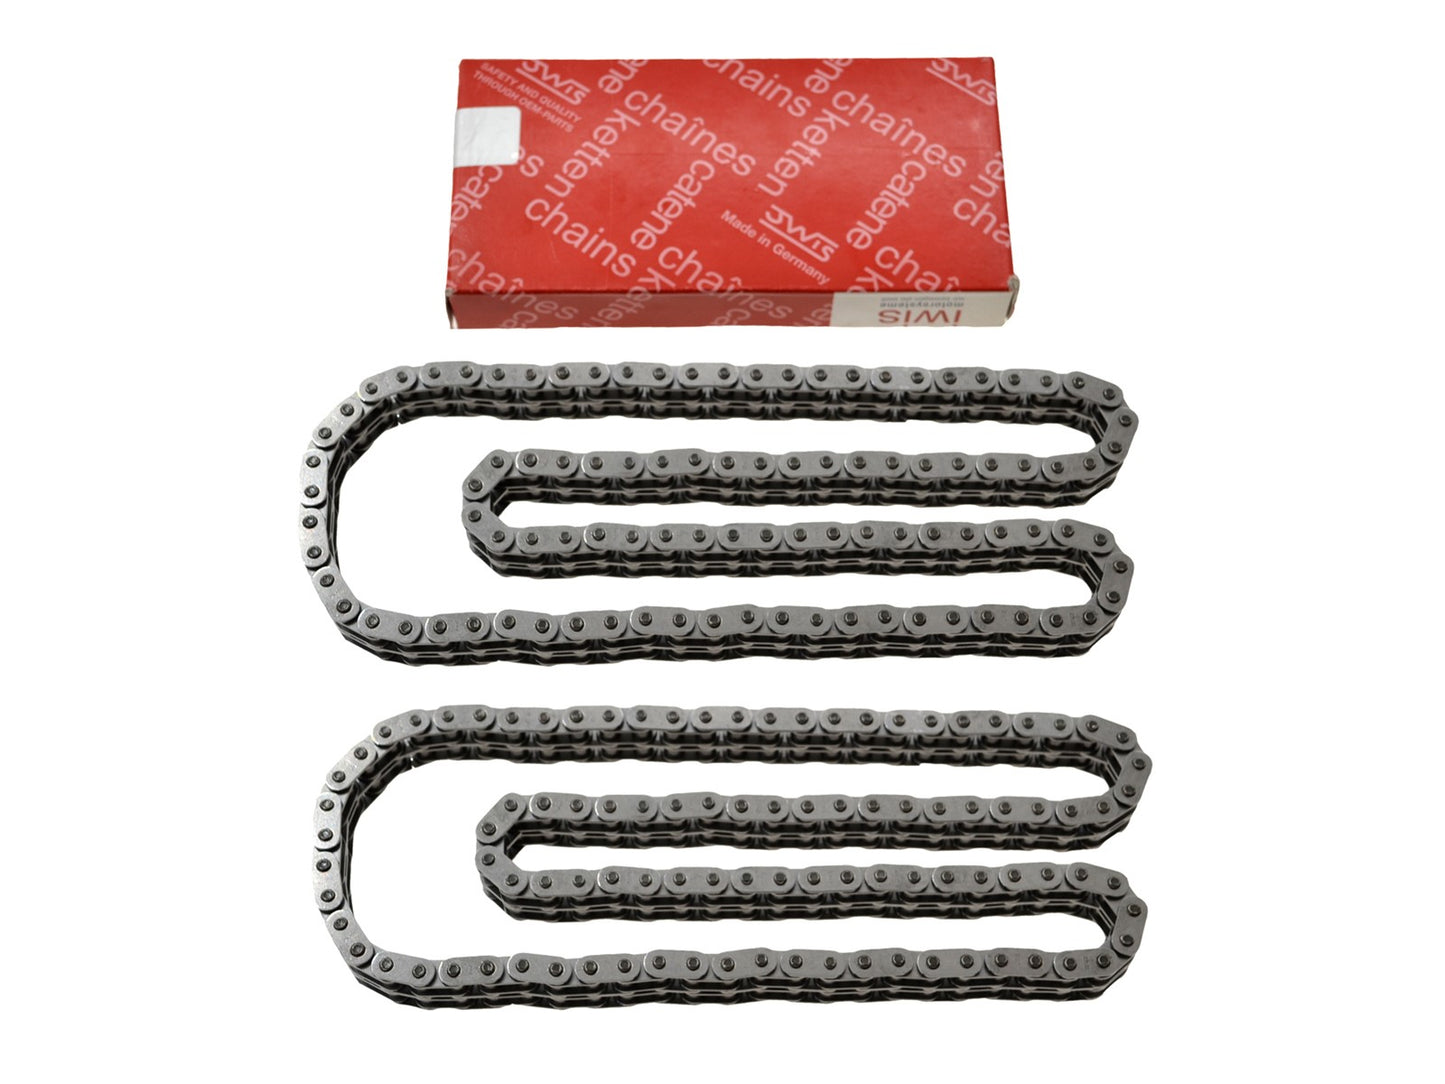 2x timing chains for Porsche 911 F G '65-'89 964 993 engine IWIS ENDLOS